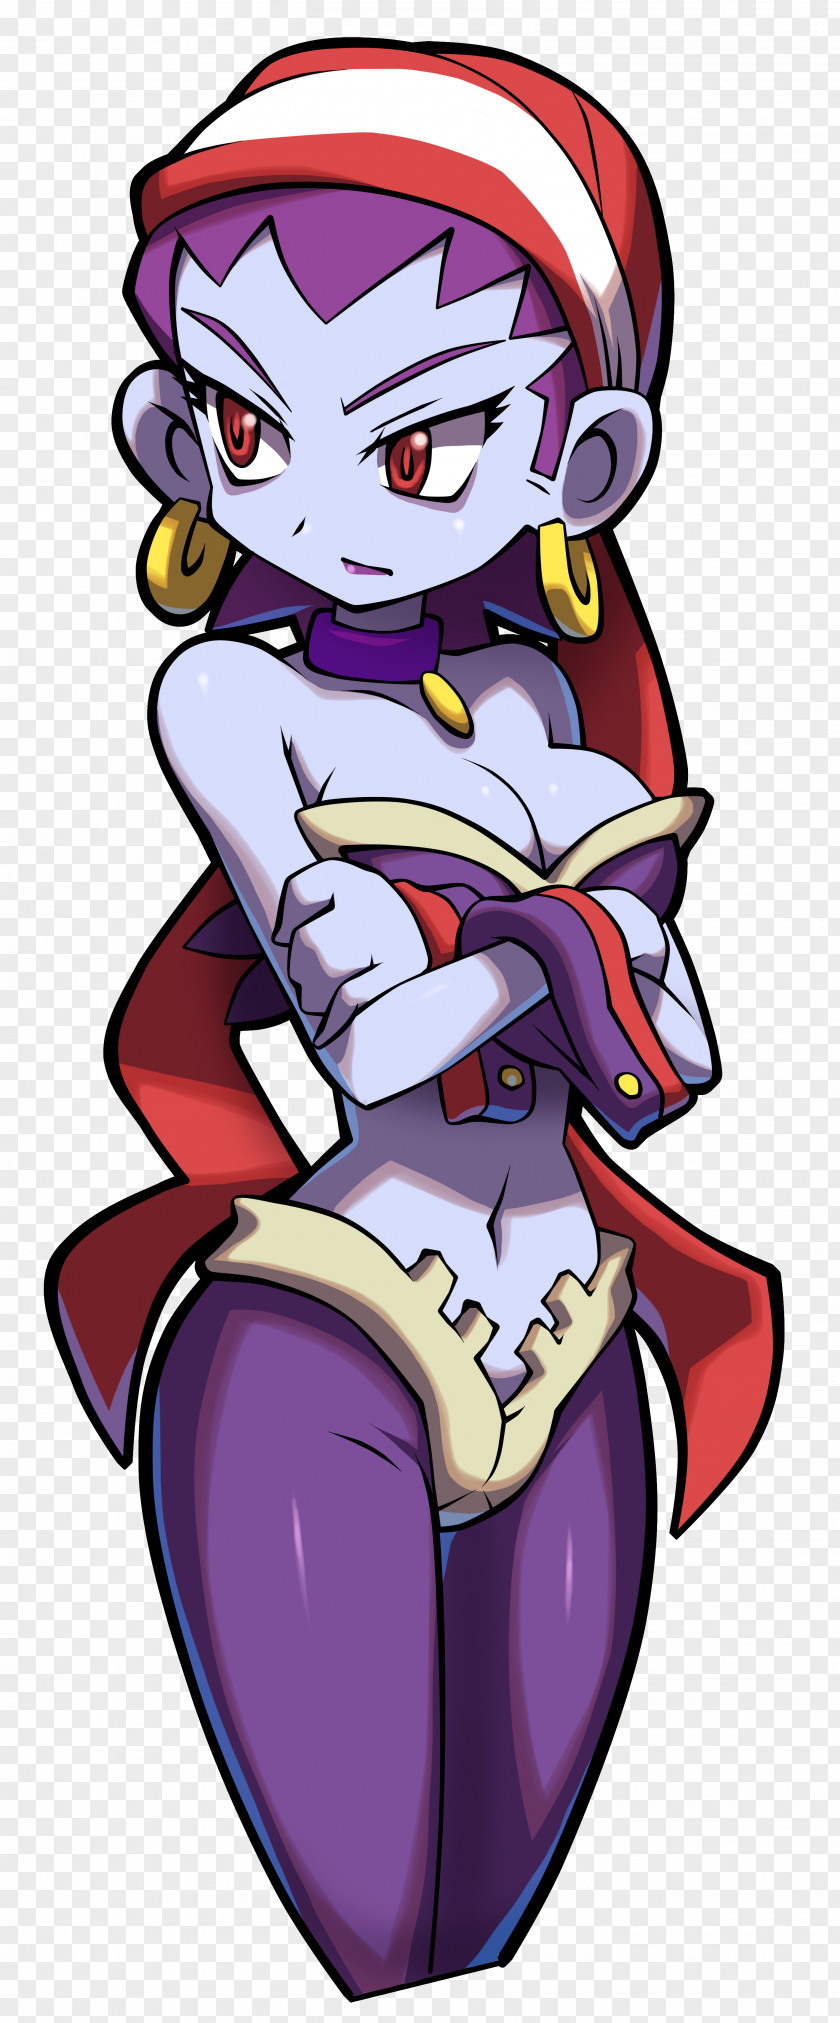 Shantae And The Pirate's Curse Wii U Nintendo 3DS Illustration North America PNG